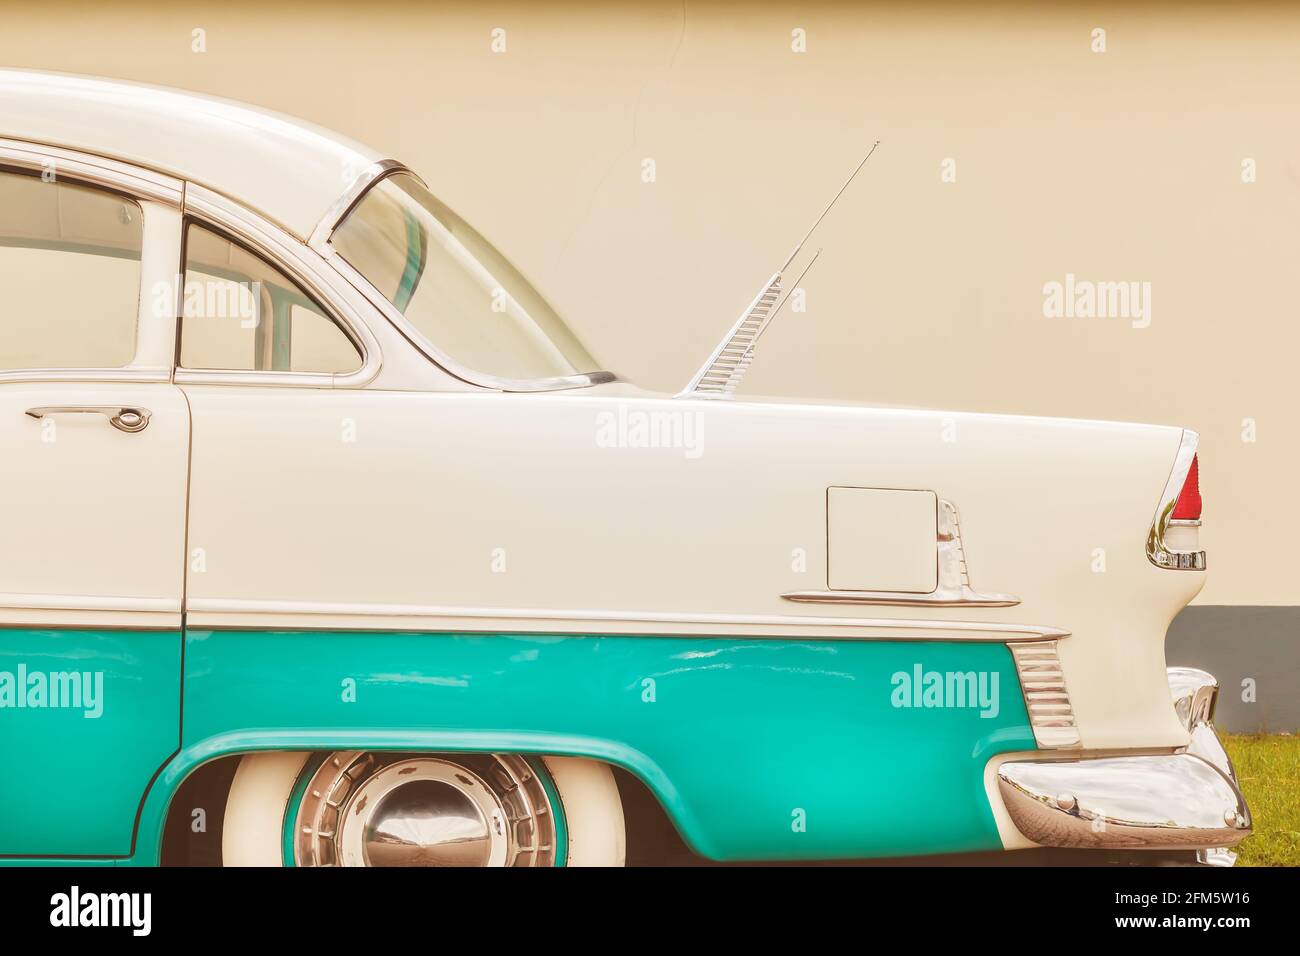 Retro styled side view of a fifties two toned American car Stock Photo